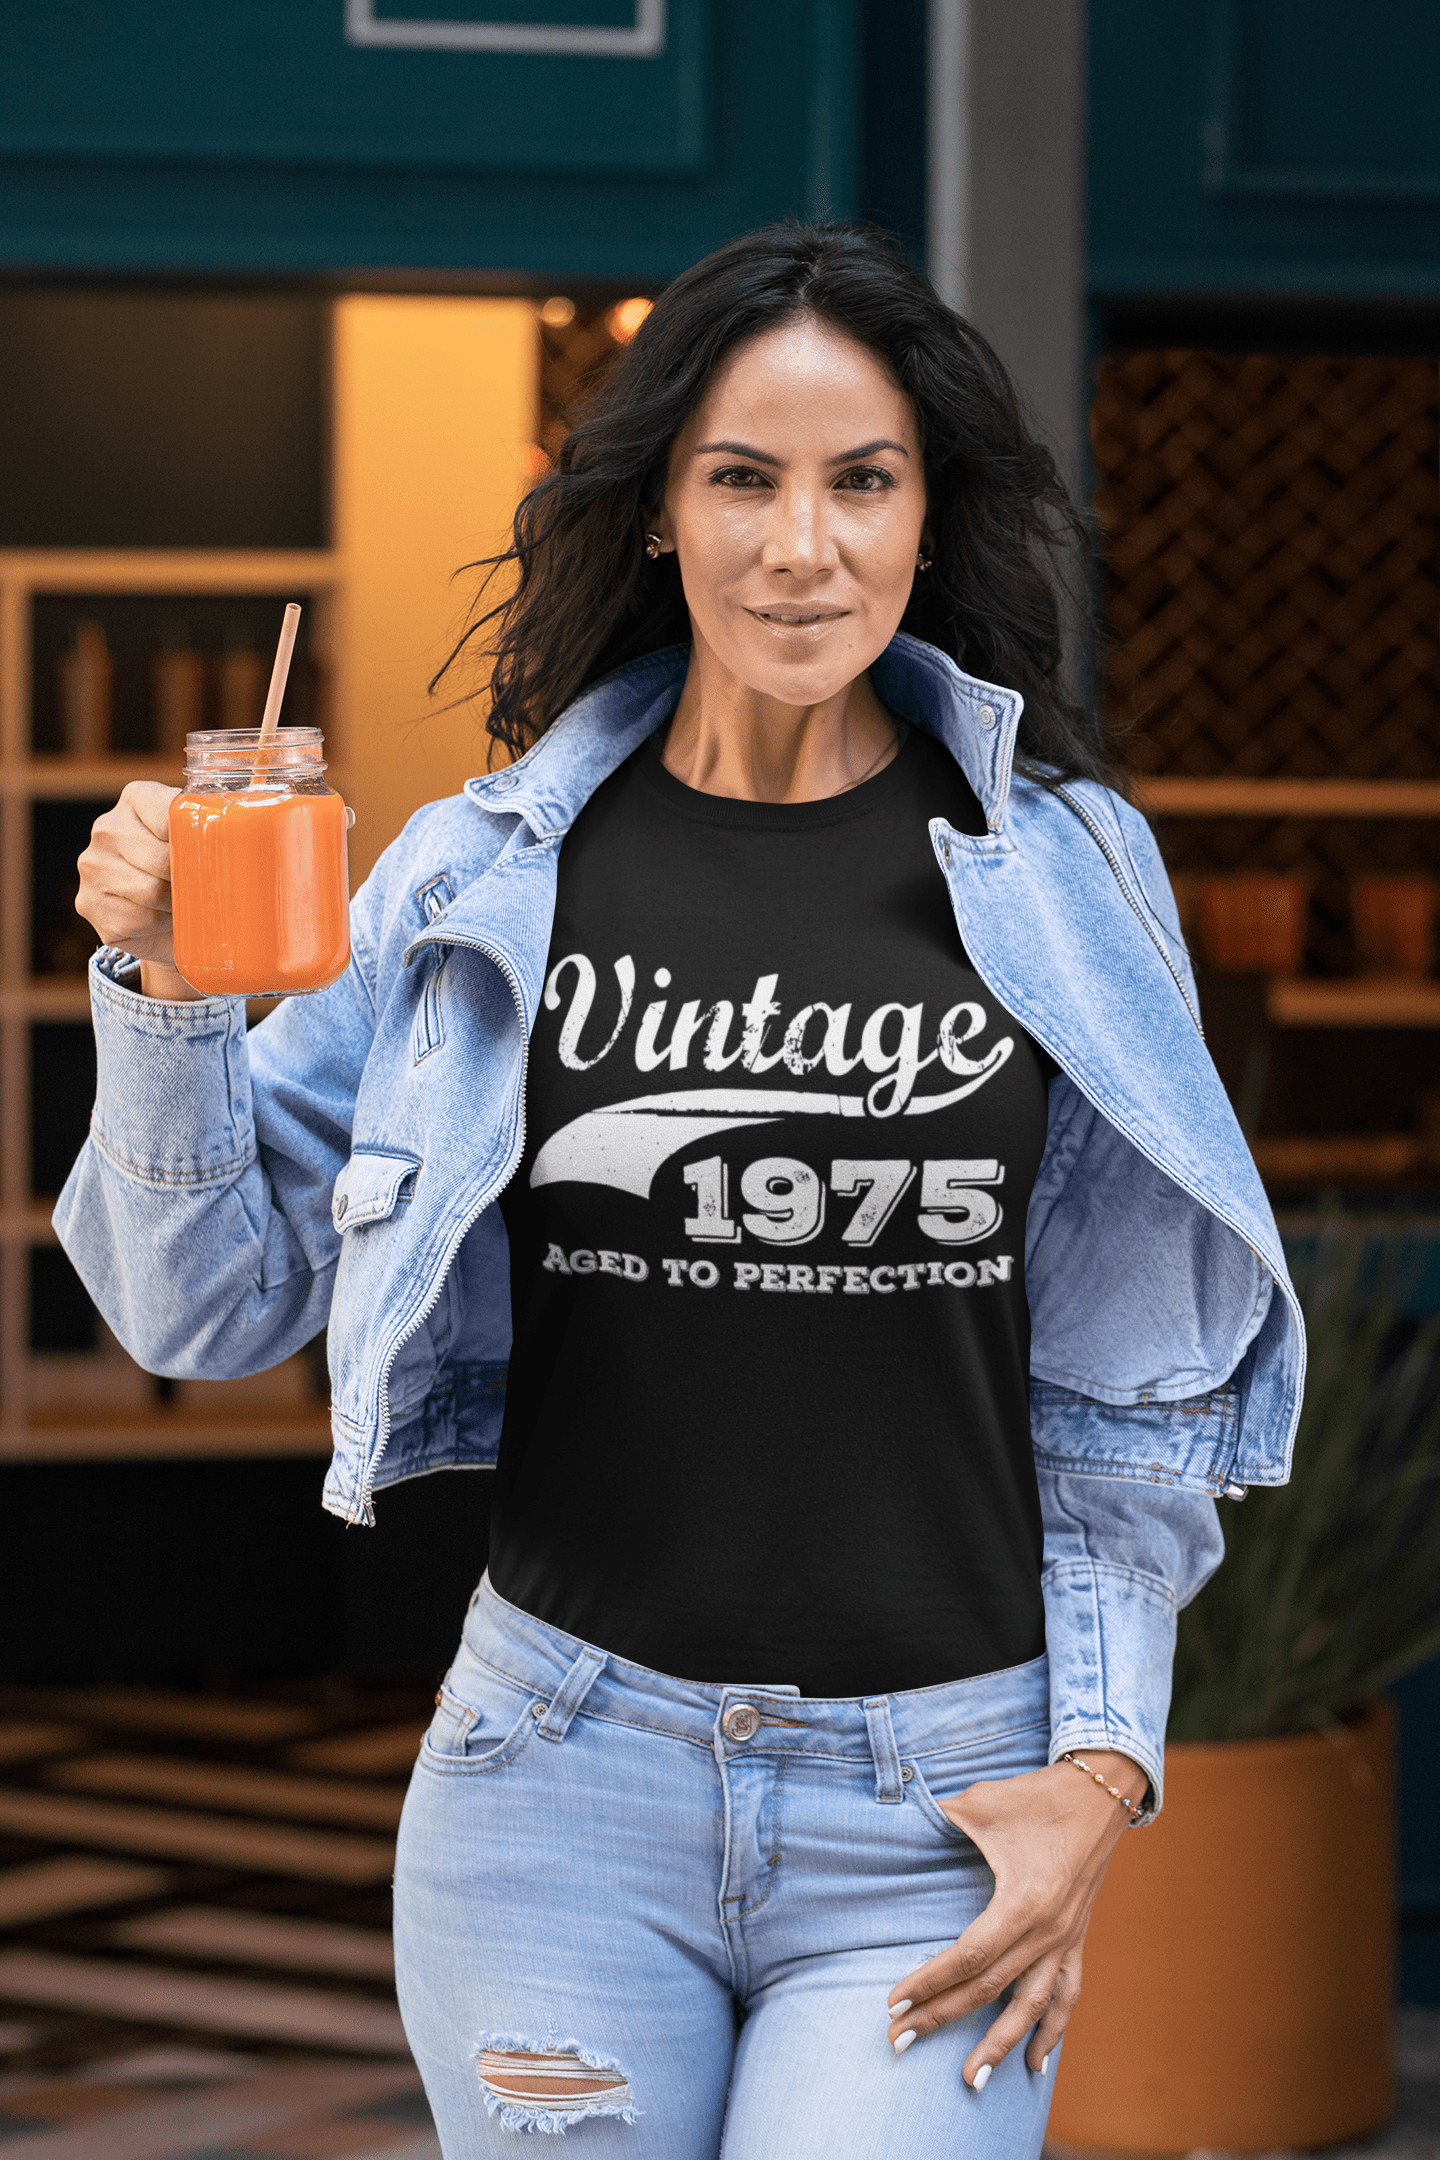 Vintage Aged to Perfection 1975, Black, Women's Short Sleeve Round Neck T-shirt, gift t-shirt 00345